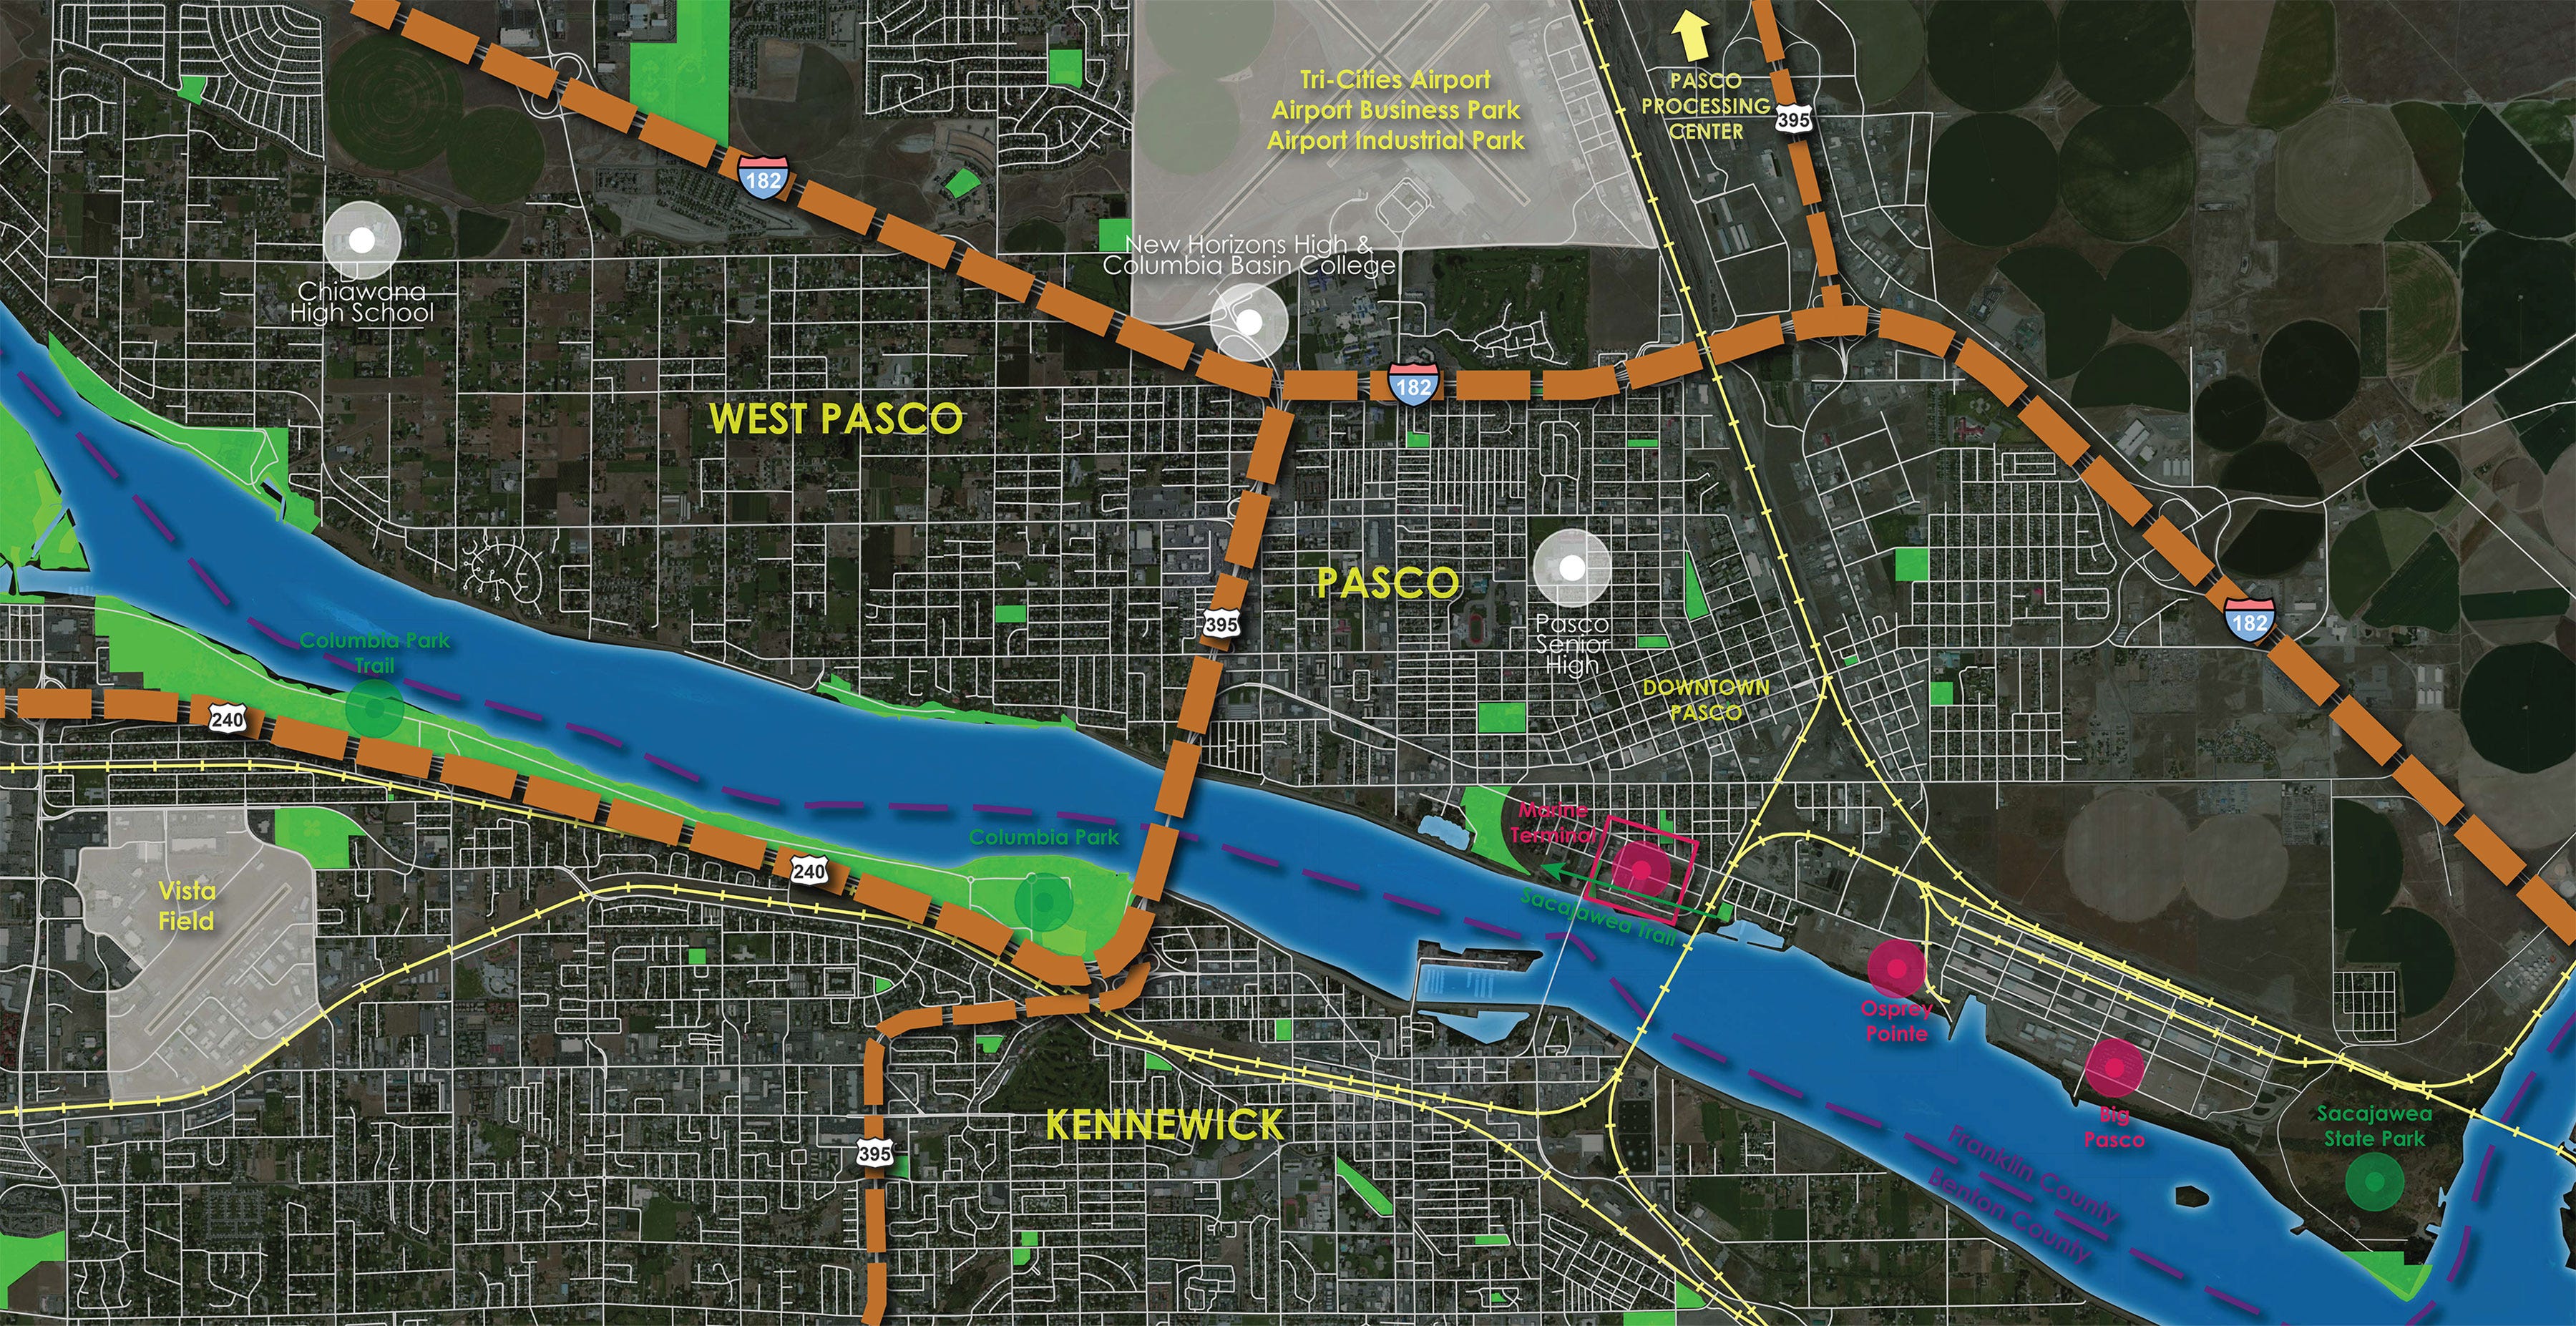 Port-of-Pasco-overview map